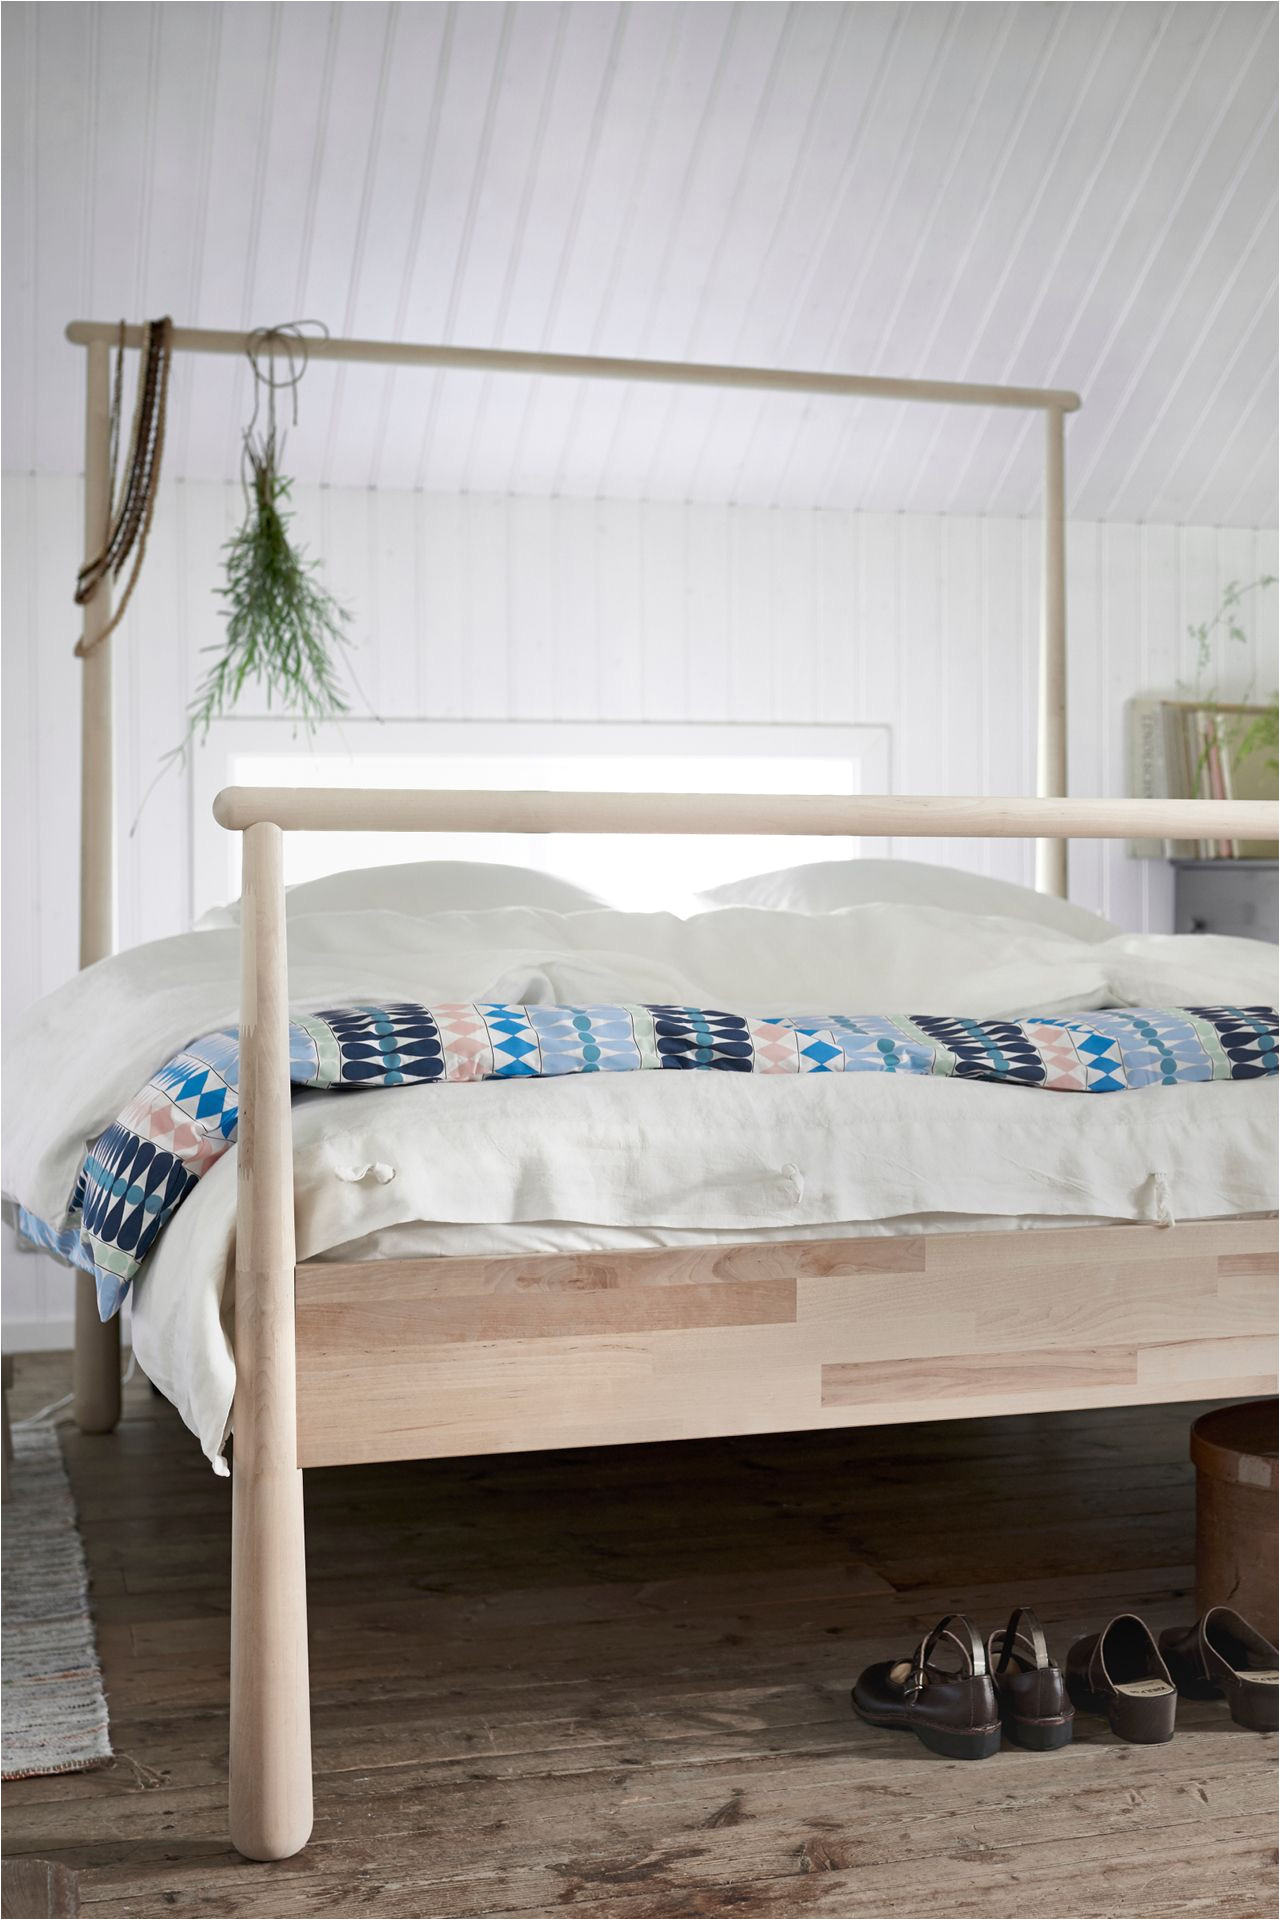 when is a bed more than a bed when it s a gja ra bed with a solid birch frame that can be a clothes hangar room divider or anything you can think of